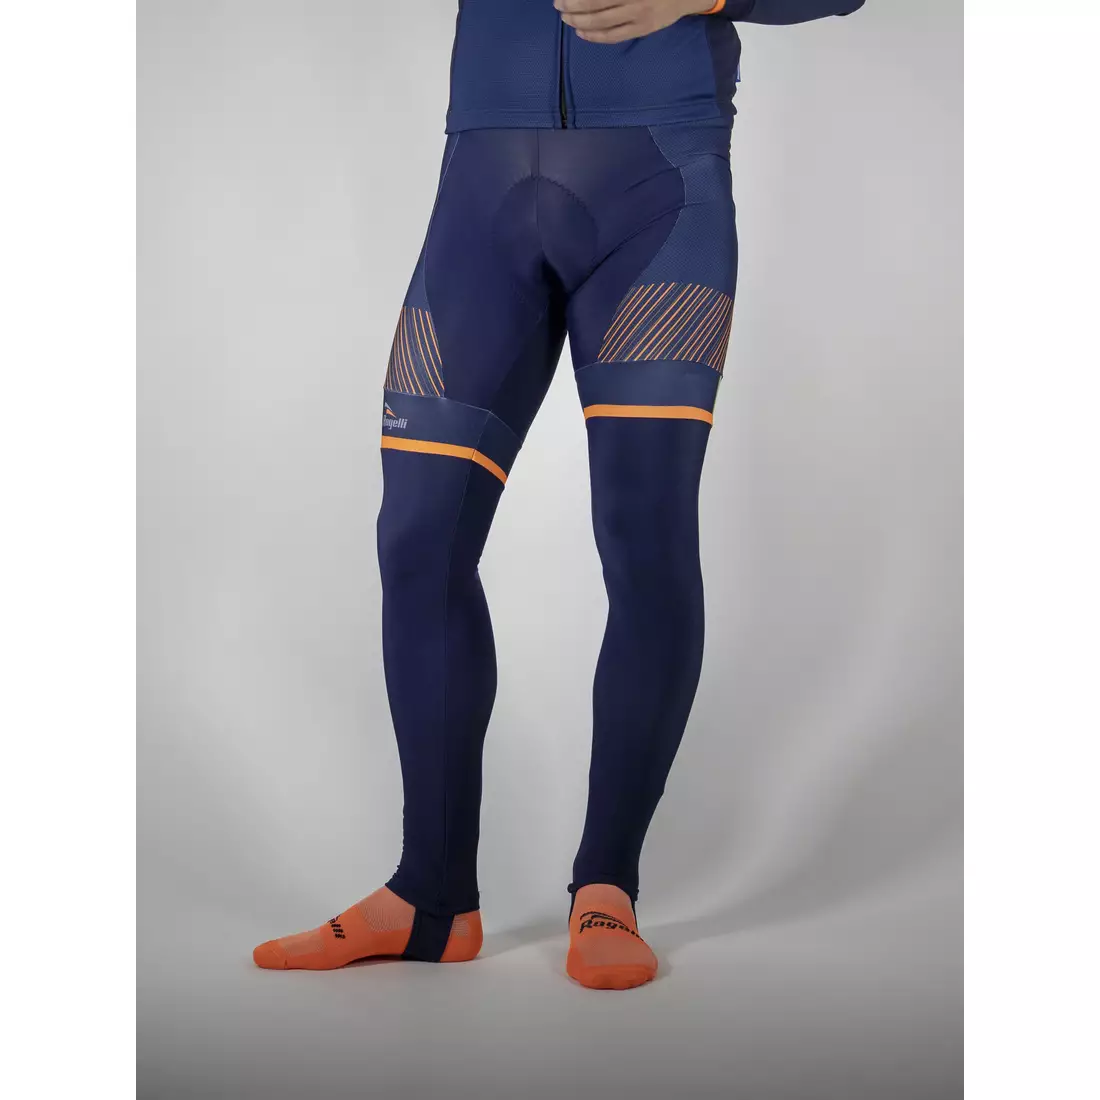 ROGELLI RITMO insulated cycling pants, navy blue-fluo orange